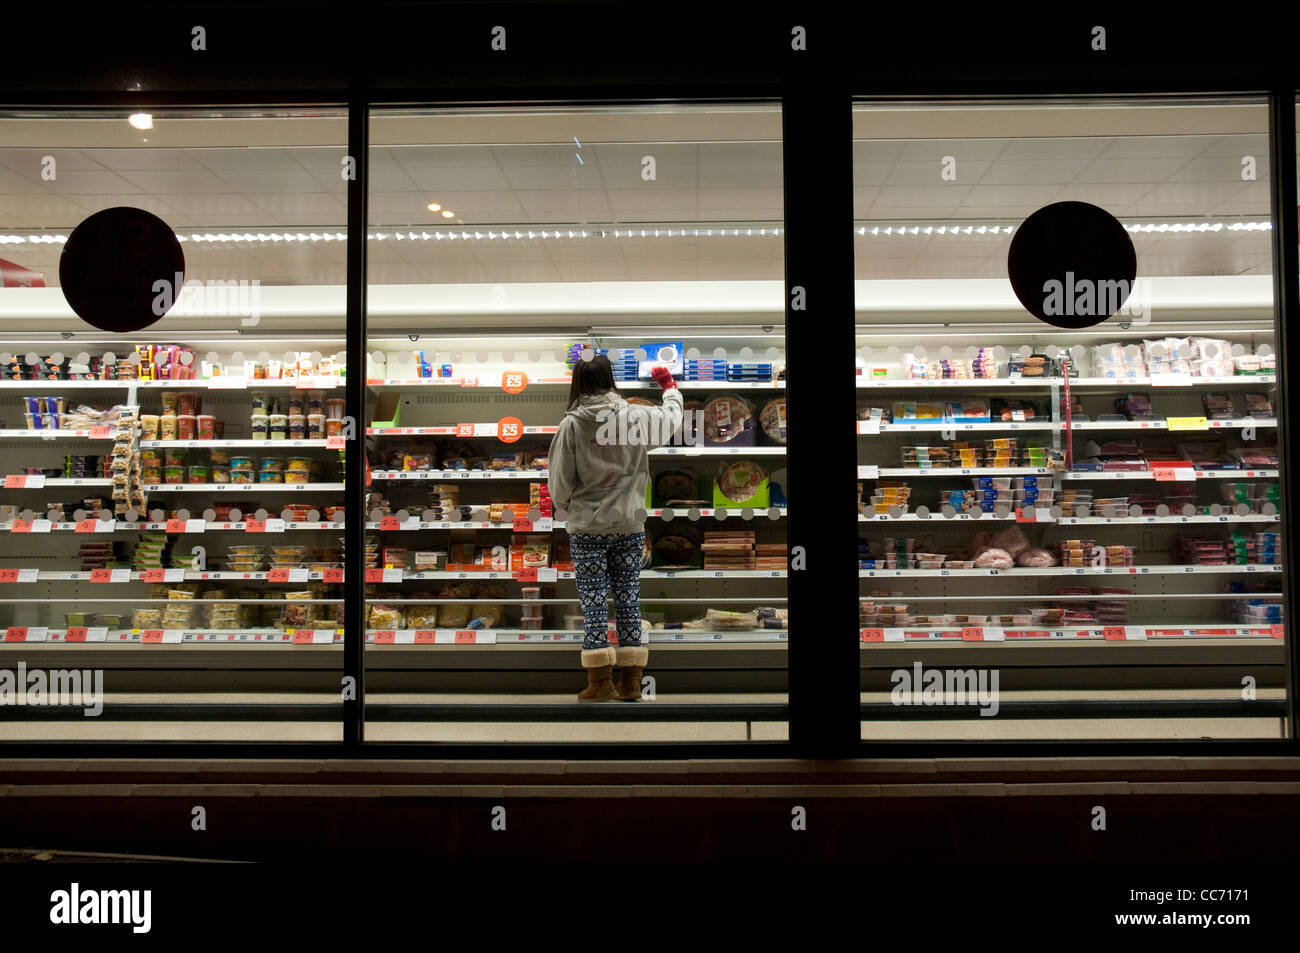 supermarket-at-night-photographed-from-outside-CC7171.jpg